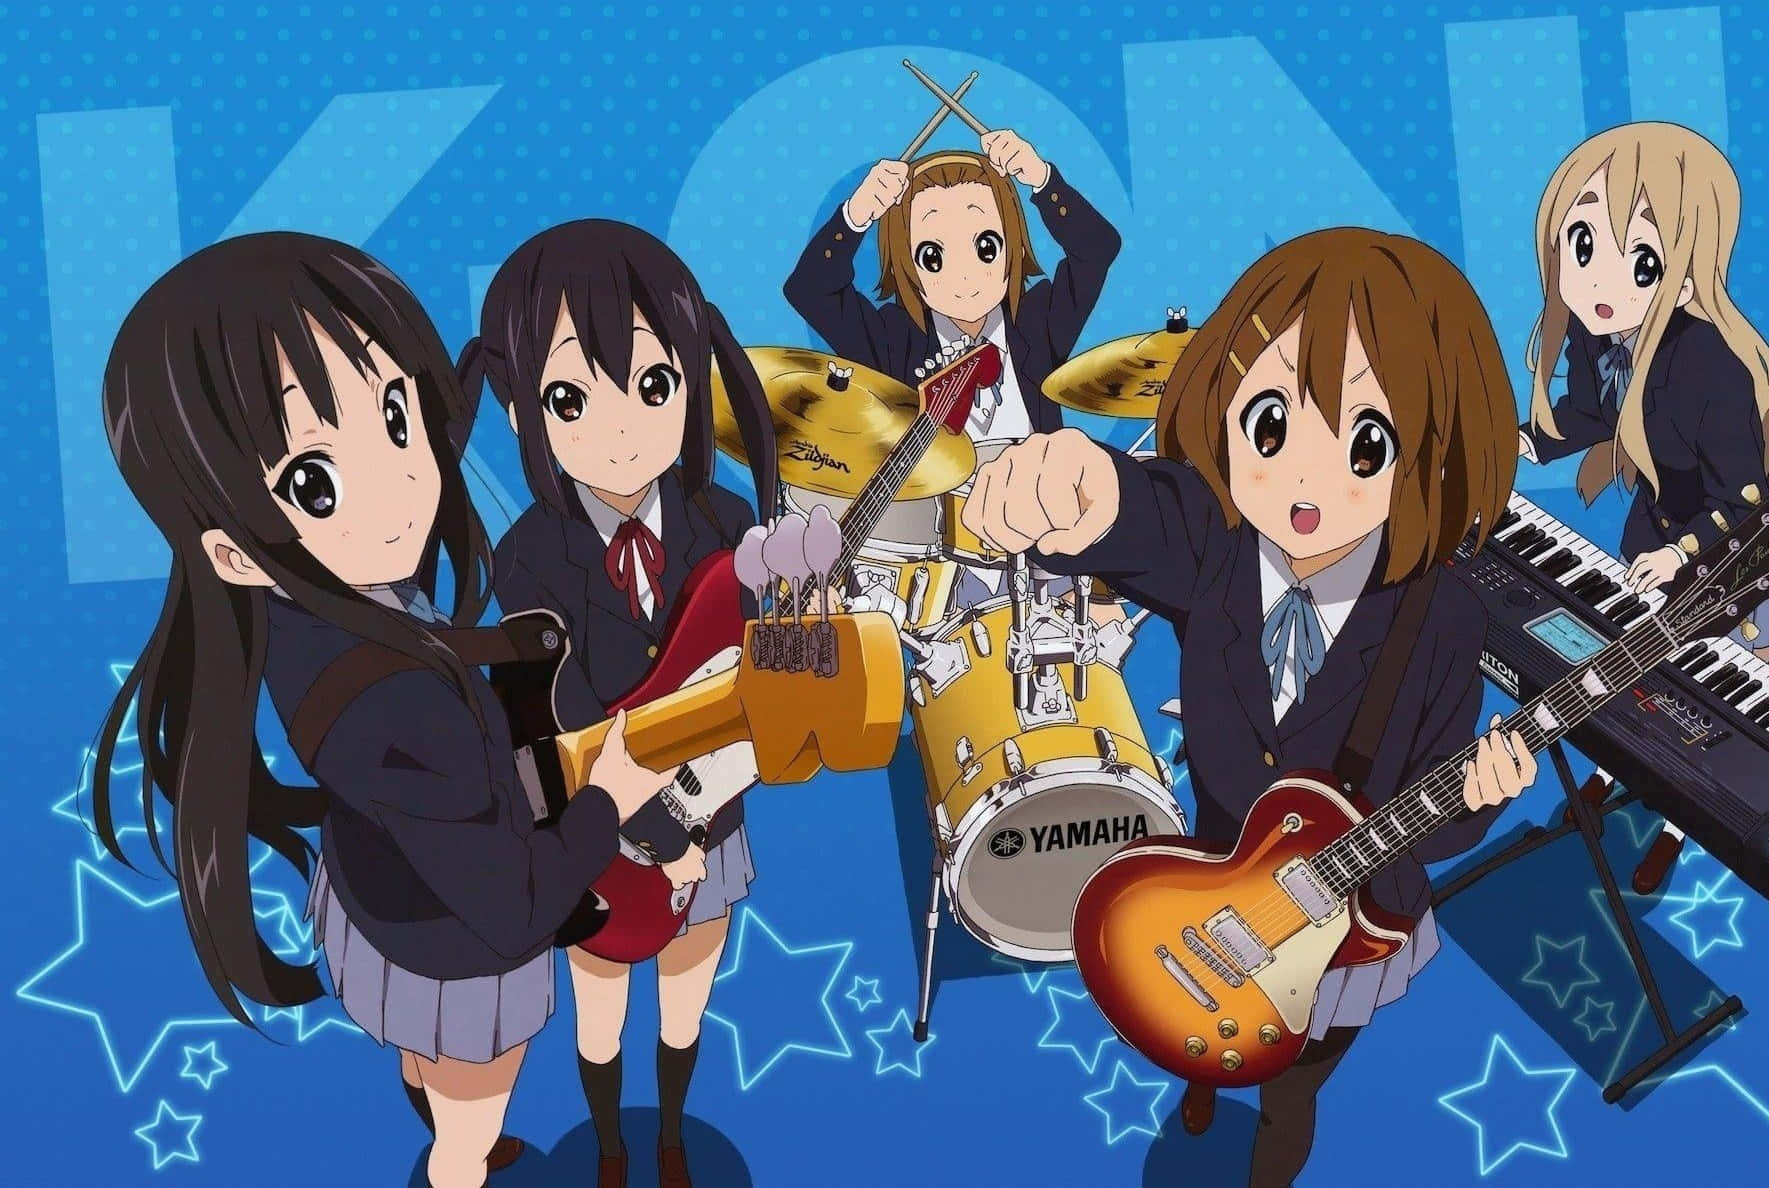 Enjoy a moment of Music with K-on